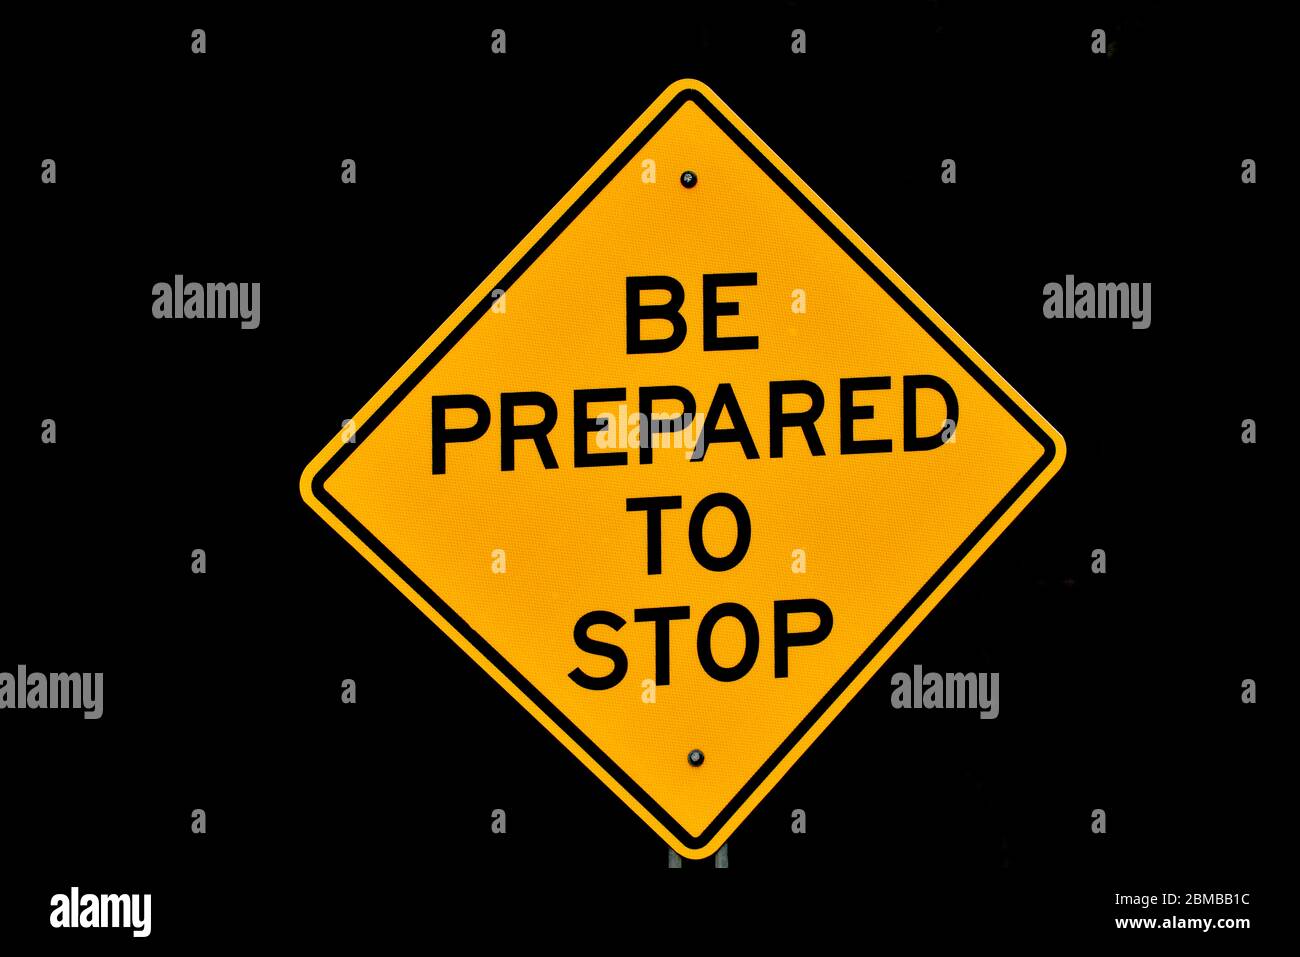 A yellow and black road sign warning drivers there is a stop ahead. Stock Photo